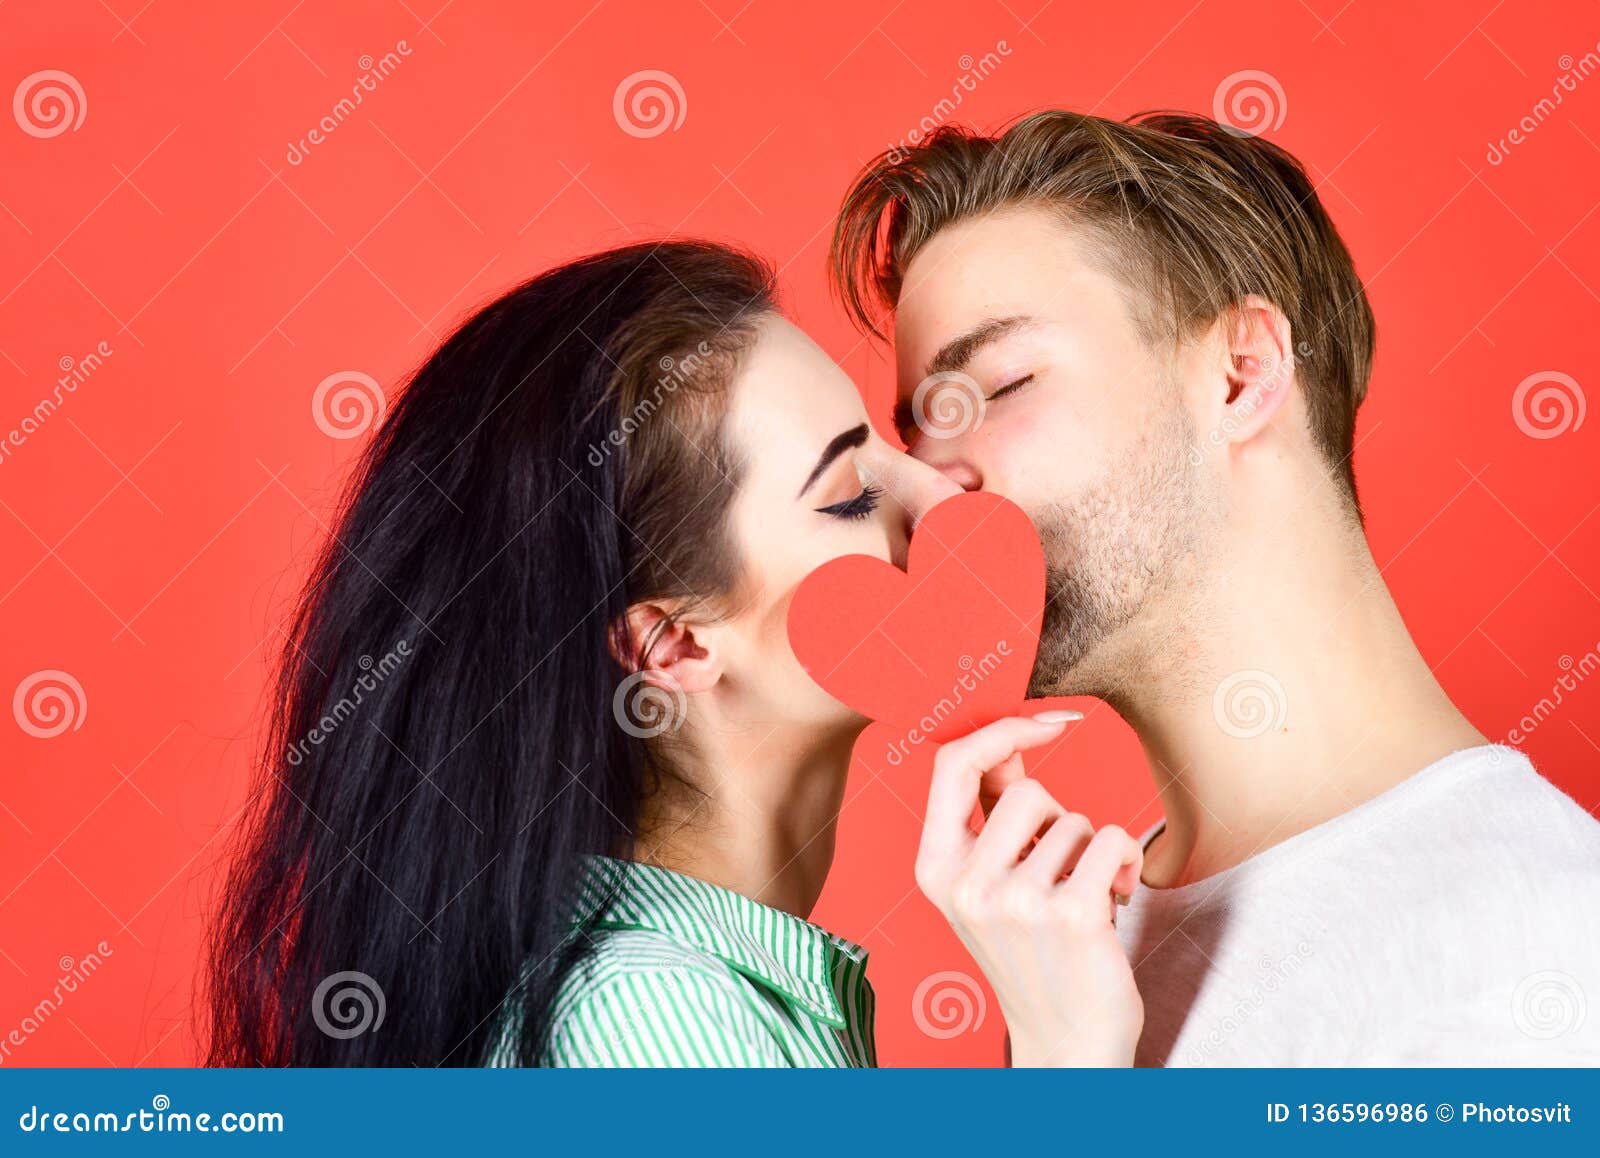 Romantic Kiss Concept. Couple in Love Kissing and Hide Lips Behind ...